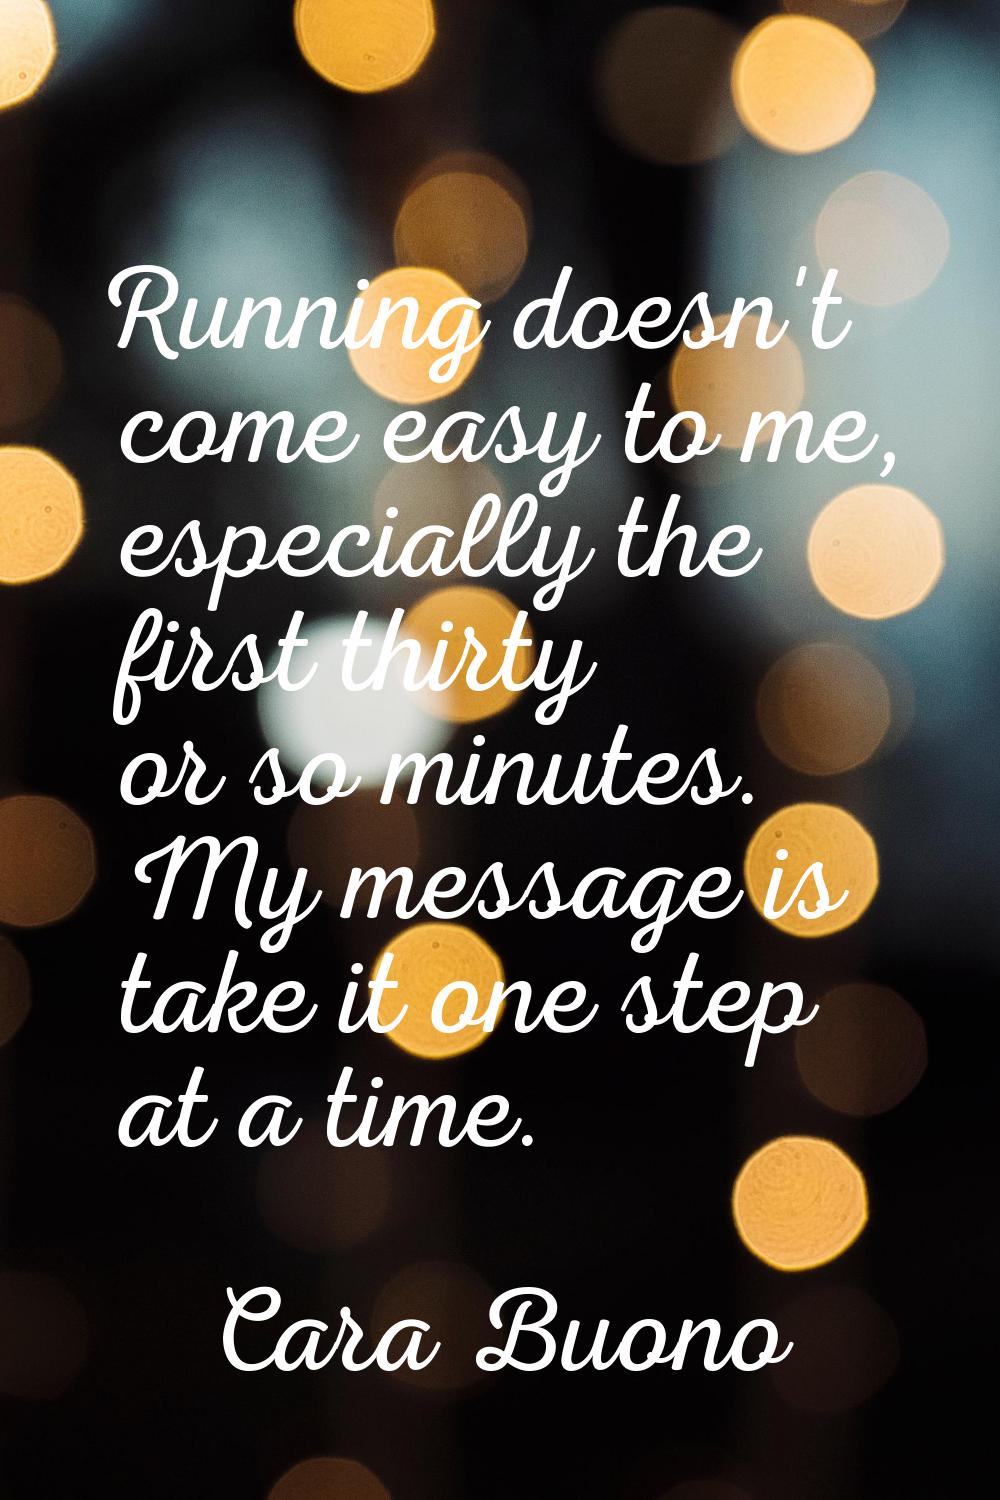 Running doesn't come easy to me, especially the first thirty or so minutes. My message is take it o